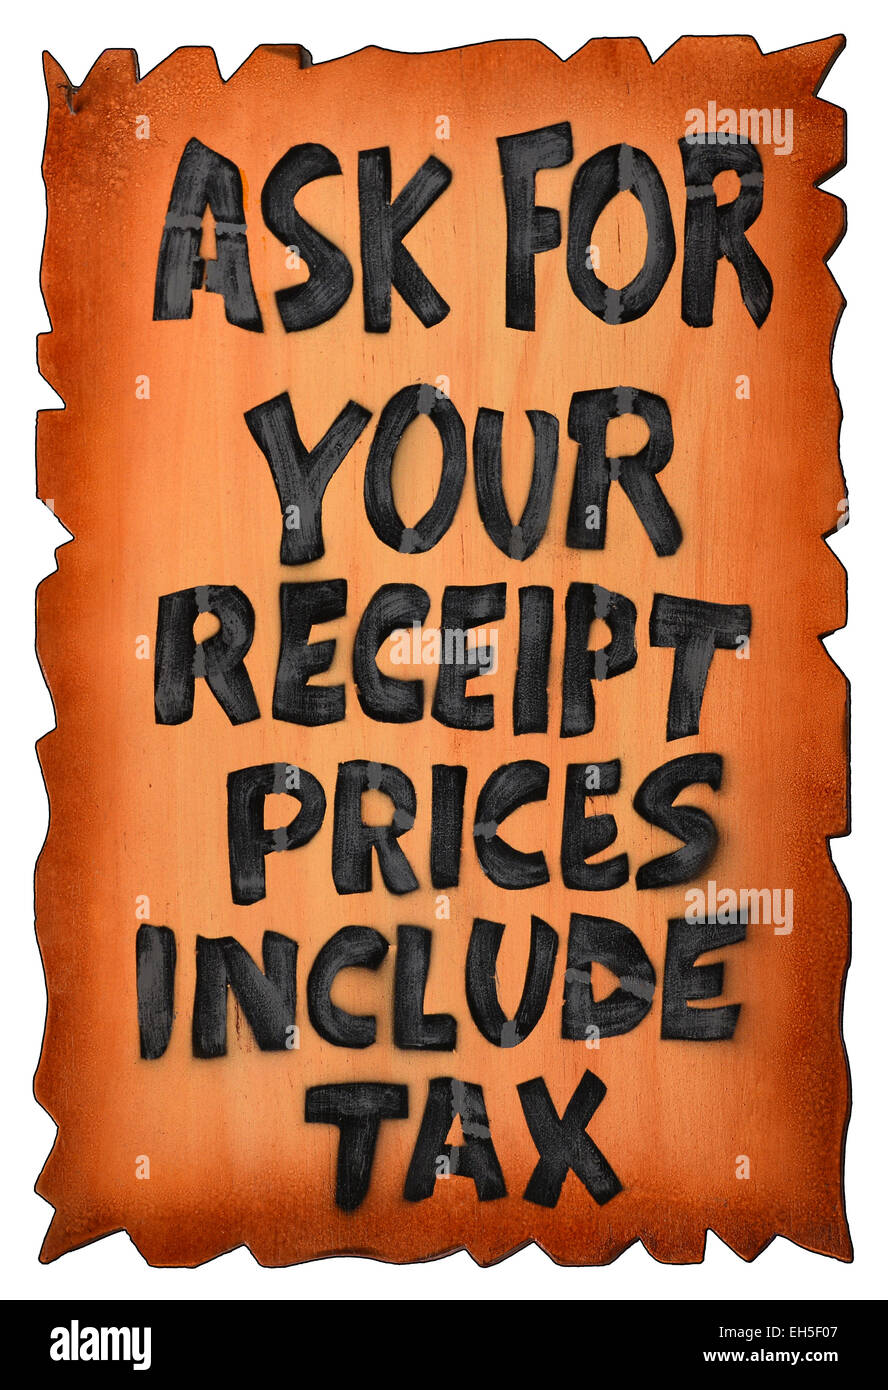 Ask for your receipt prices include tax write with black on a wood plate. Stock Photo